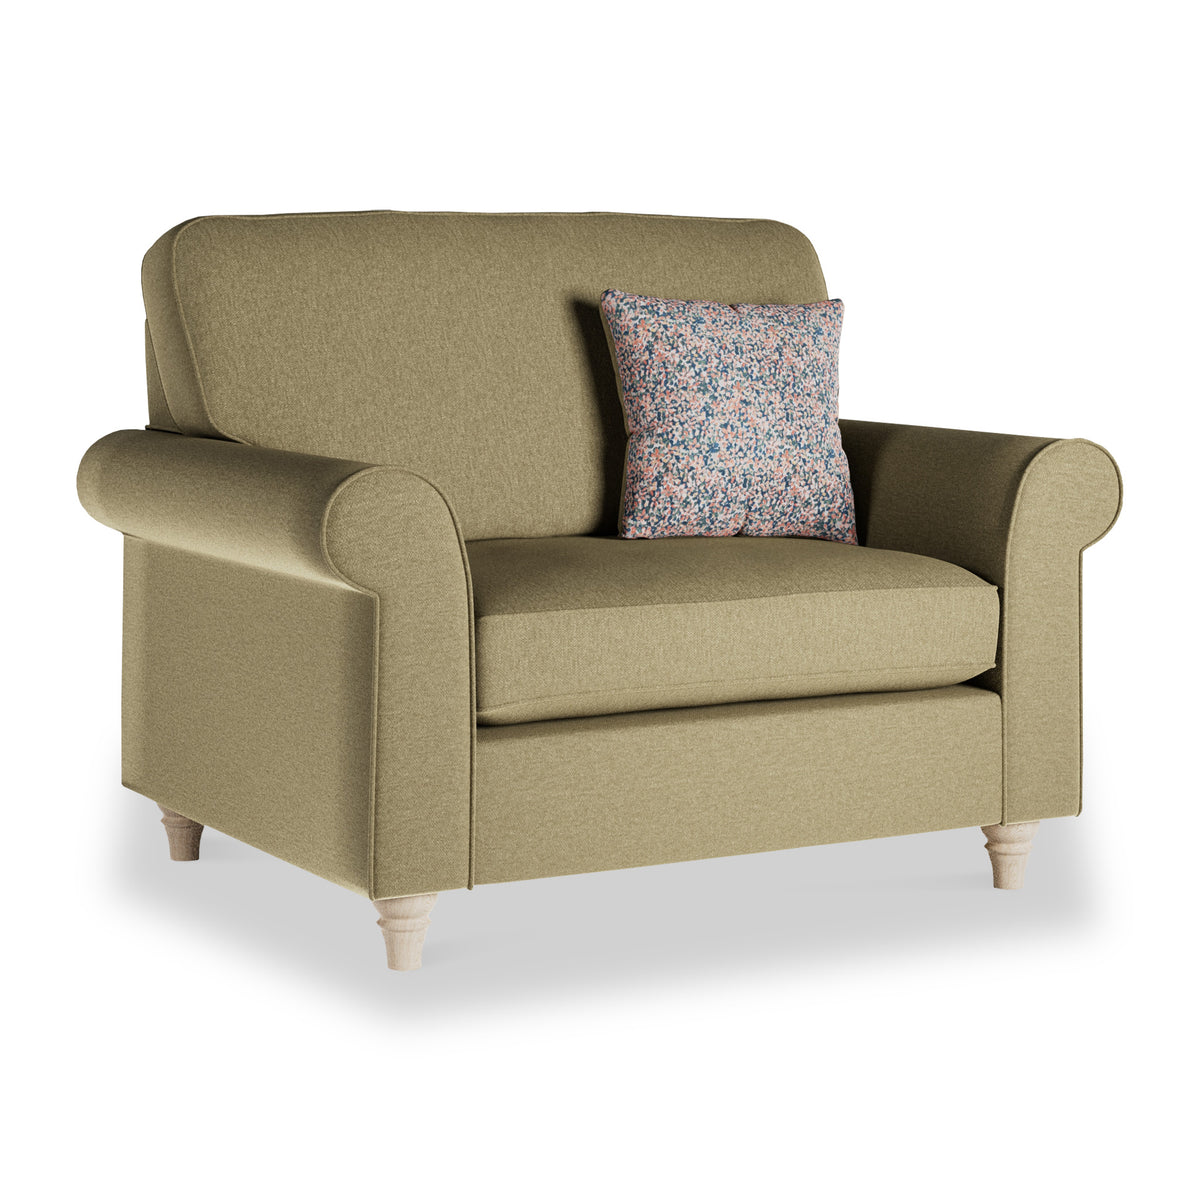 Thomas Olive Snuggle Armchair from Roseland Furniture